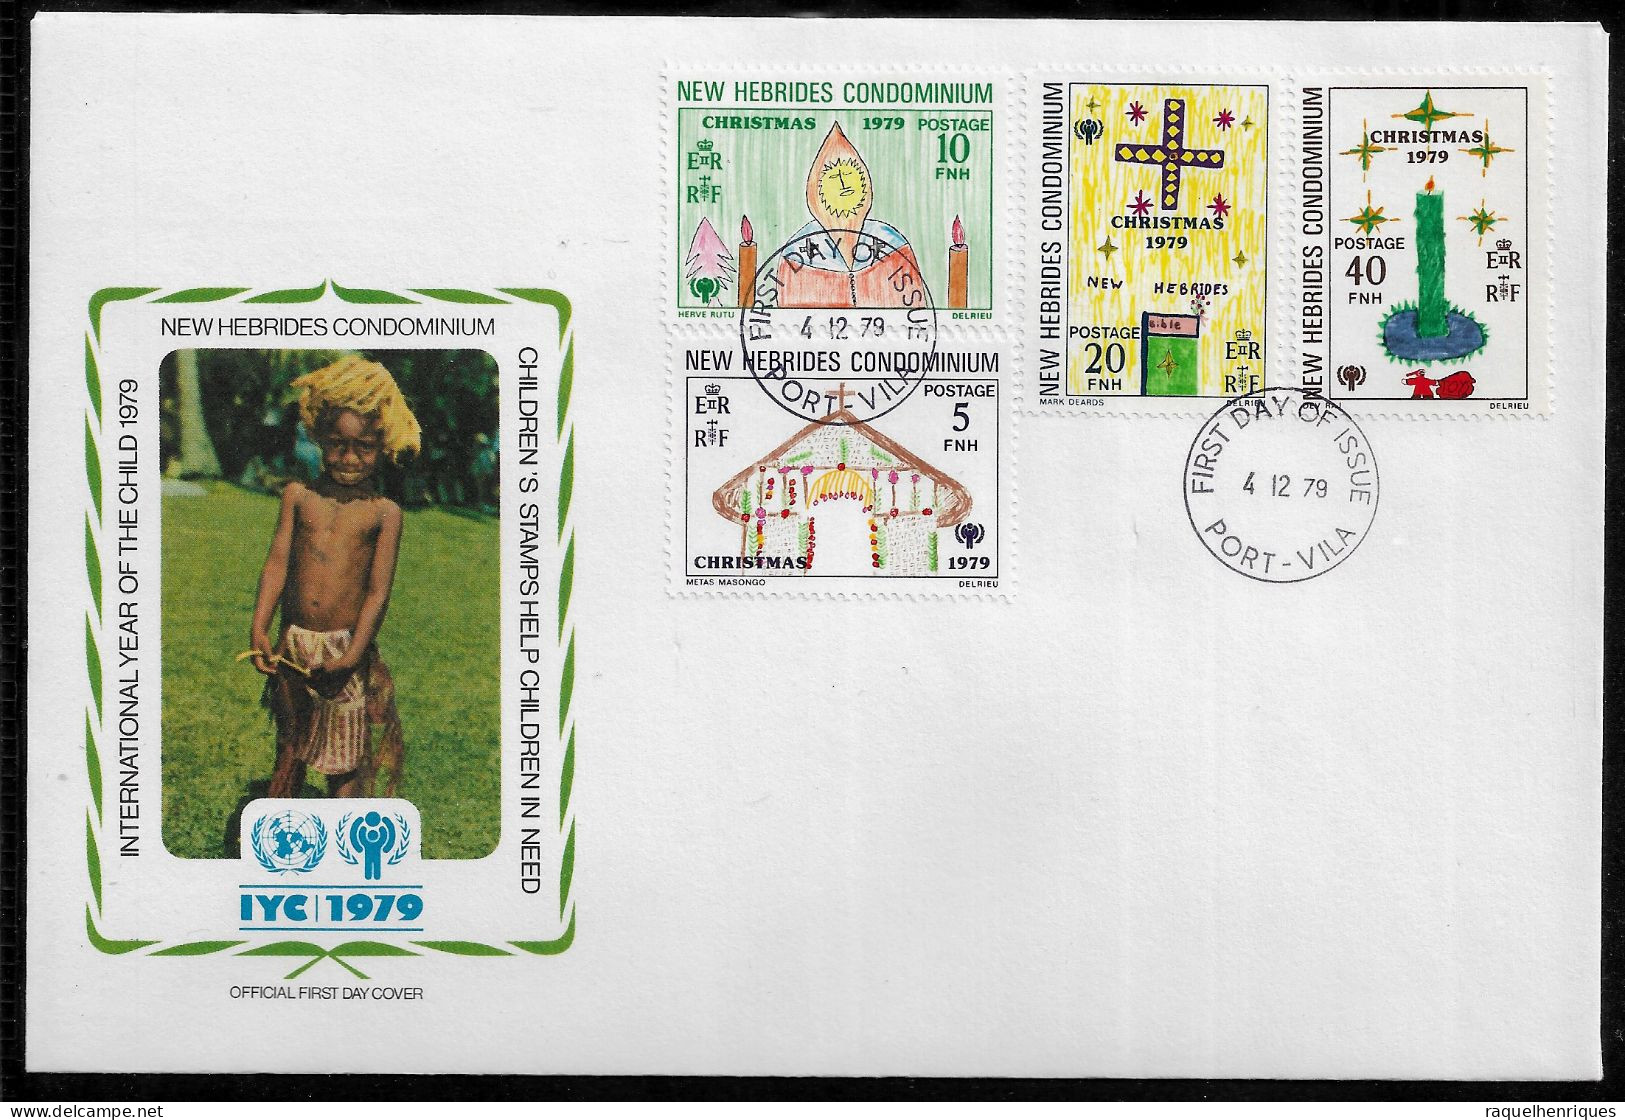 NEW HEBRIDES FDC COVER - 1979 International Year Of The Child ENGLISH SET FDC (FDC79#04) - Covers & Documents